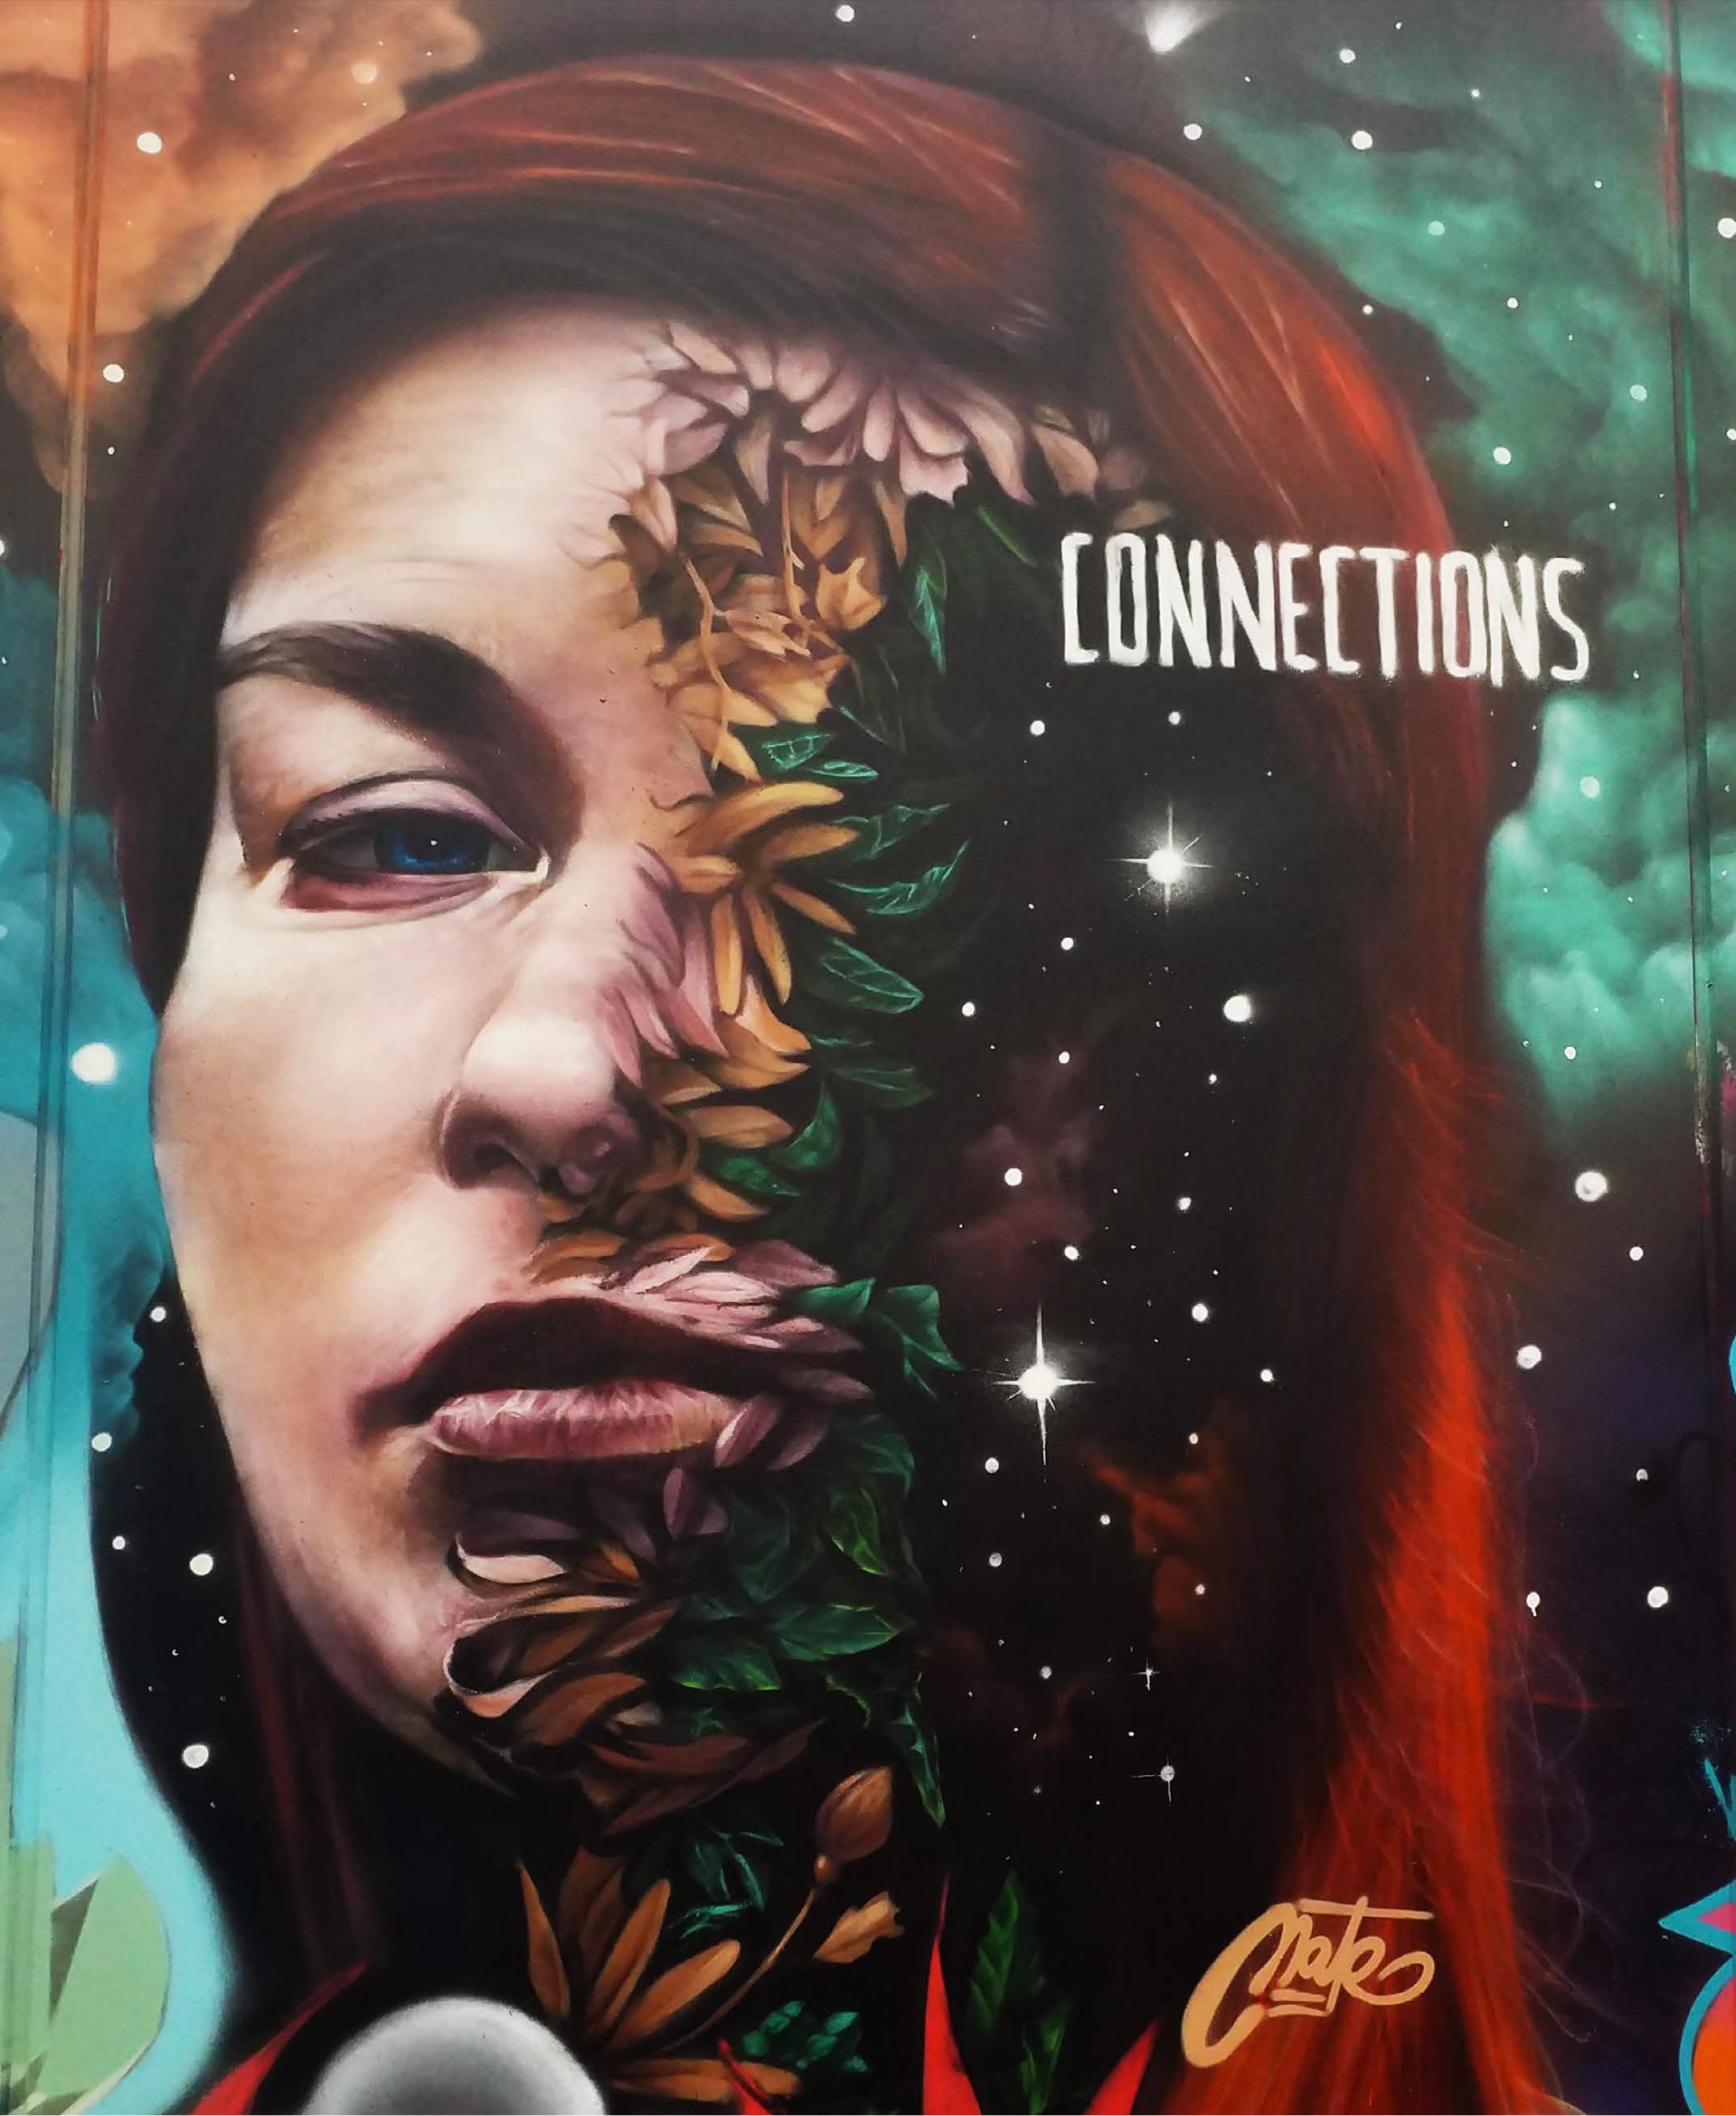 Connections - Berlin, 2019